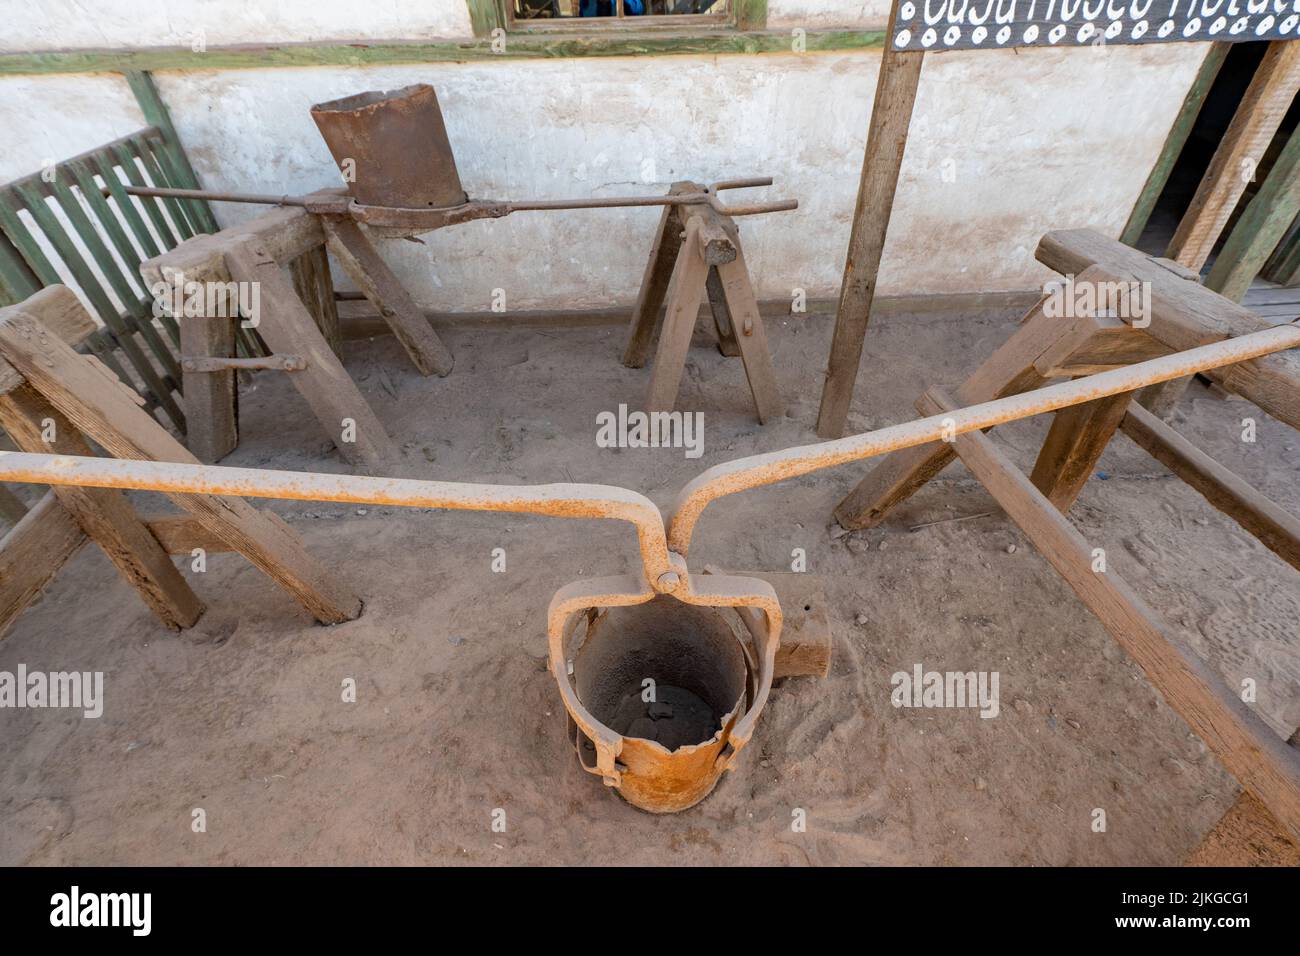 Museum display of buckets with carrying handles for use in the saltpeter works in Humberstone, Chile. Stock Photo